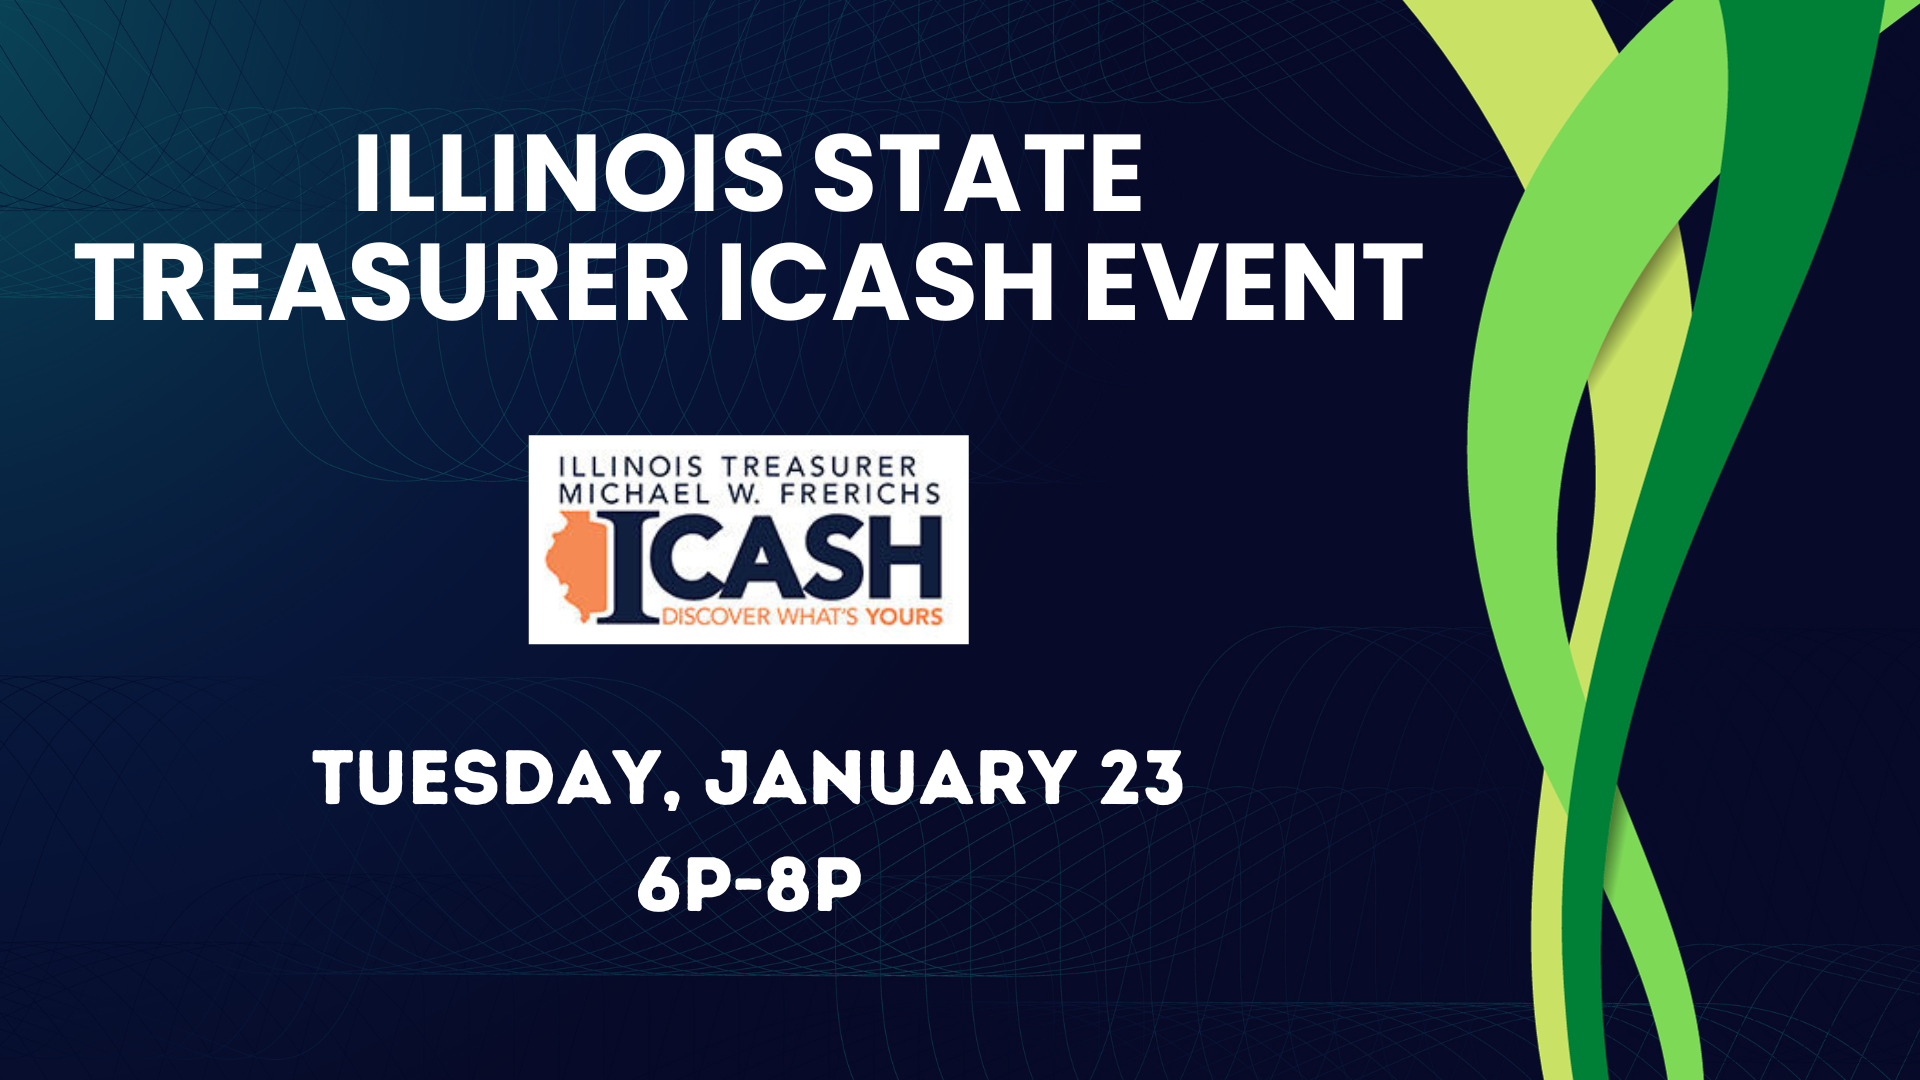 Illinois State Treasurer iCash Event Palos Heights Public Library